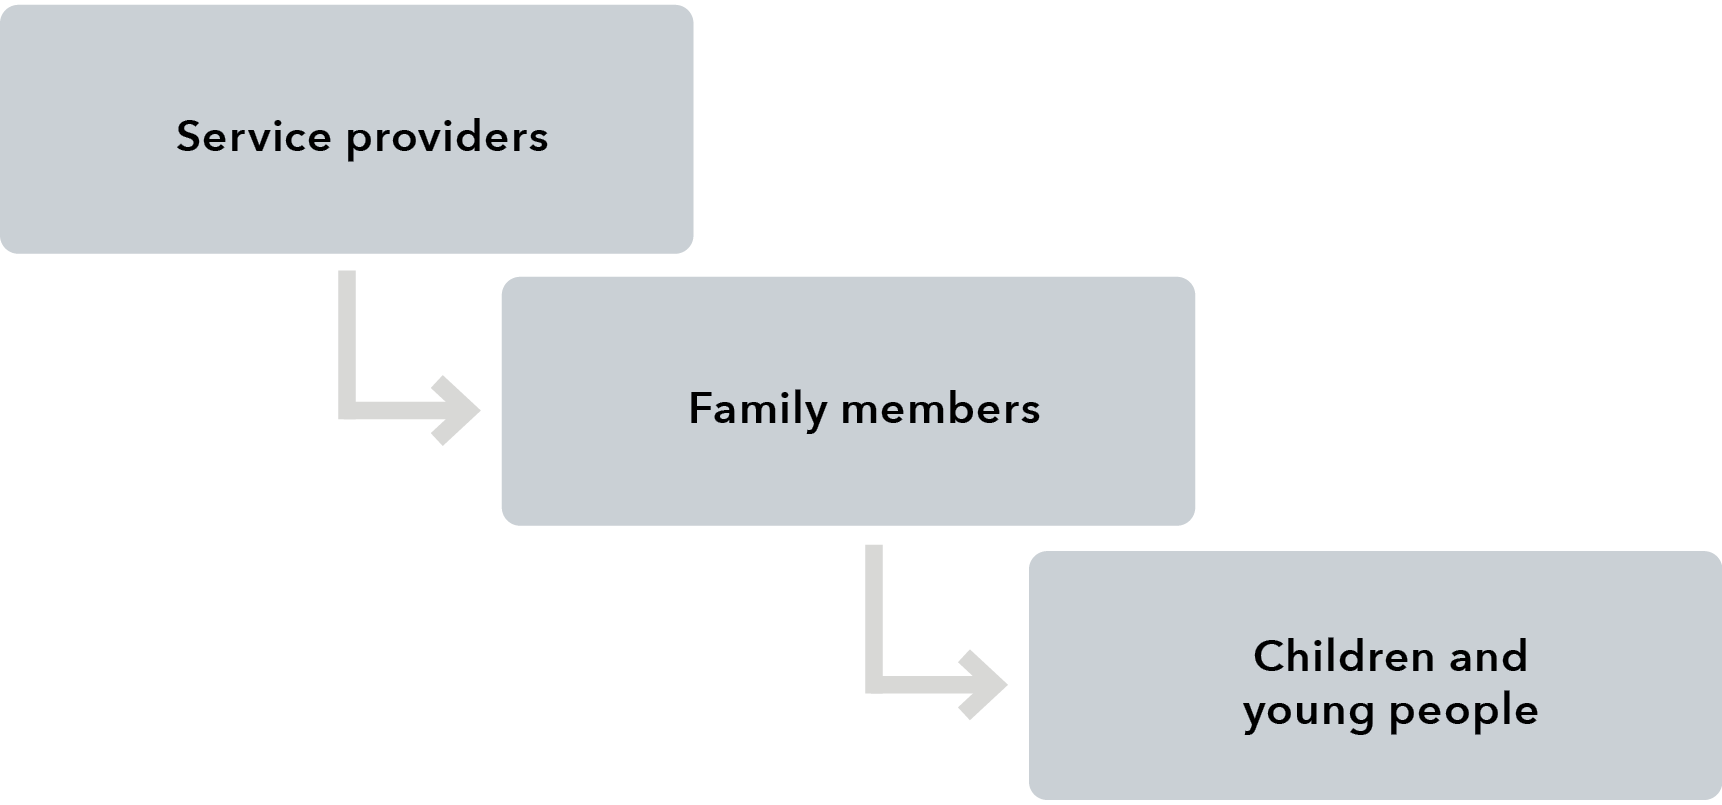 A flow chart with three boxes. Service providers points to Family members. Family members points to Children and young people.